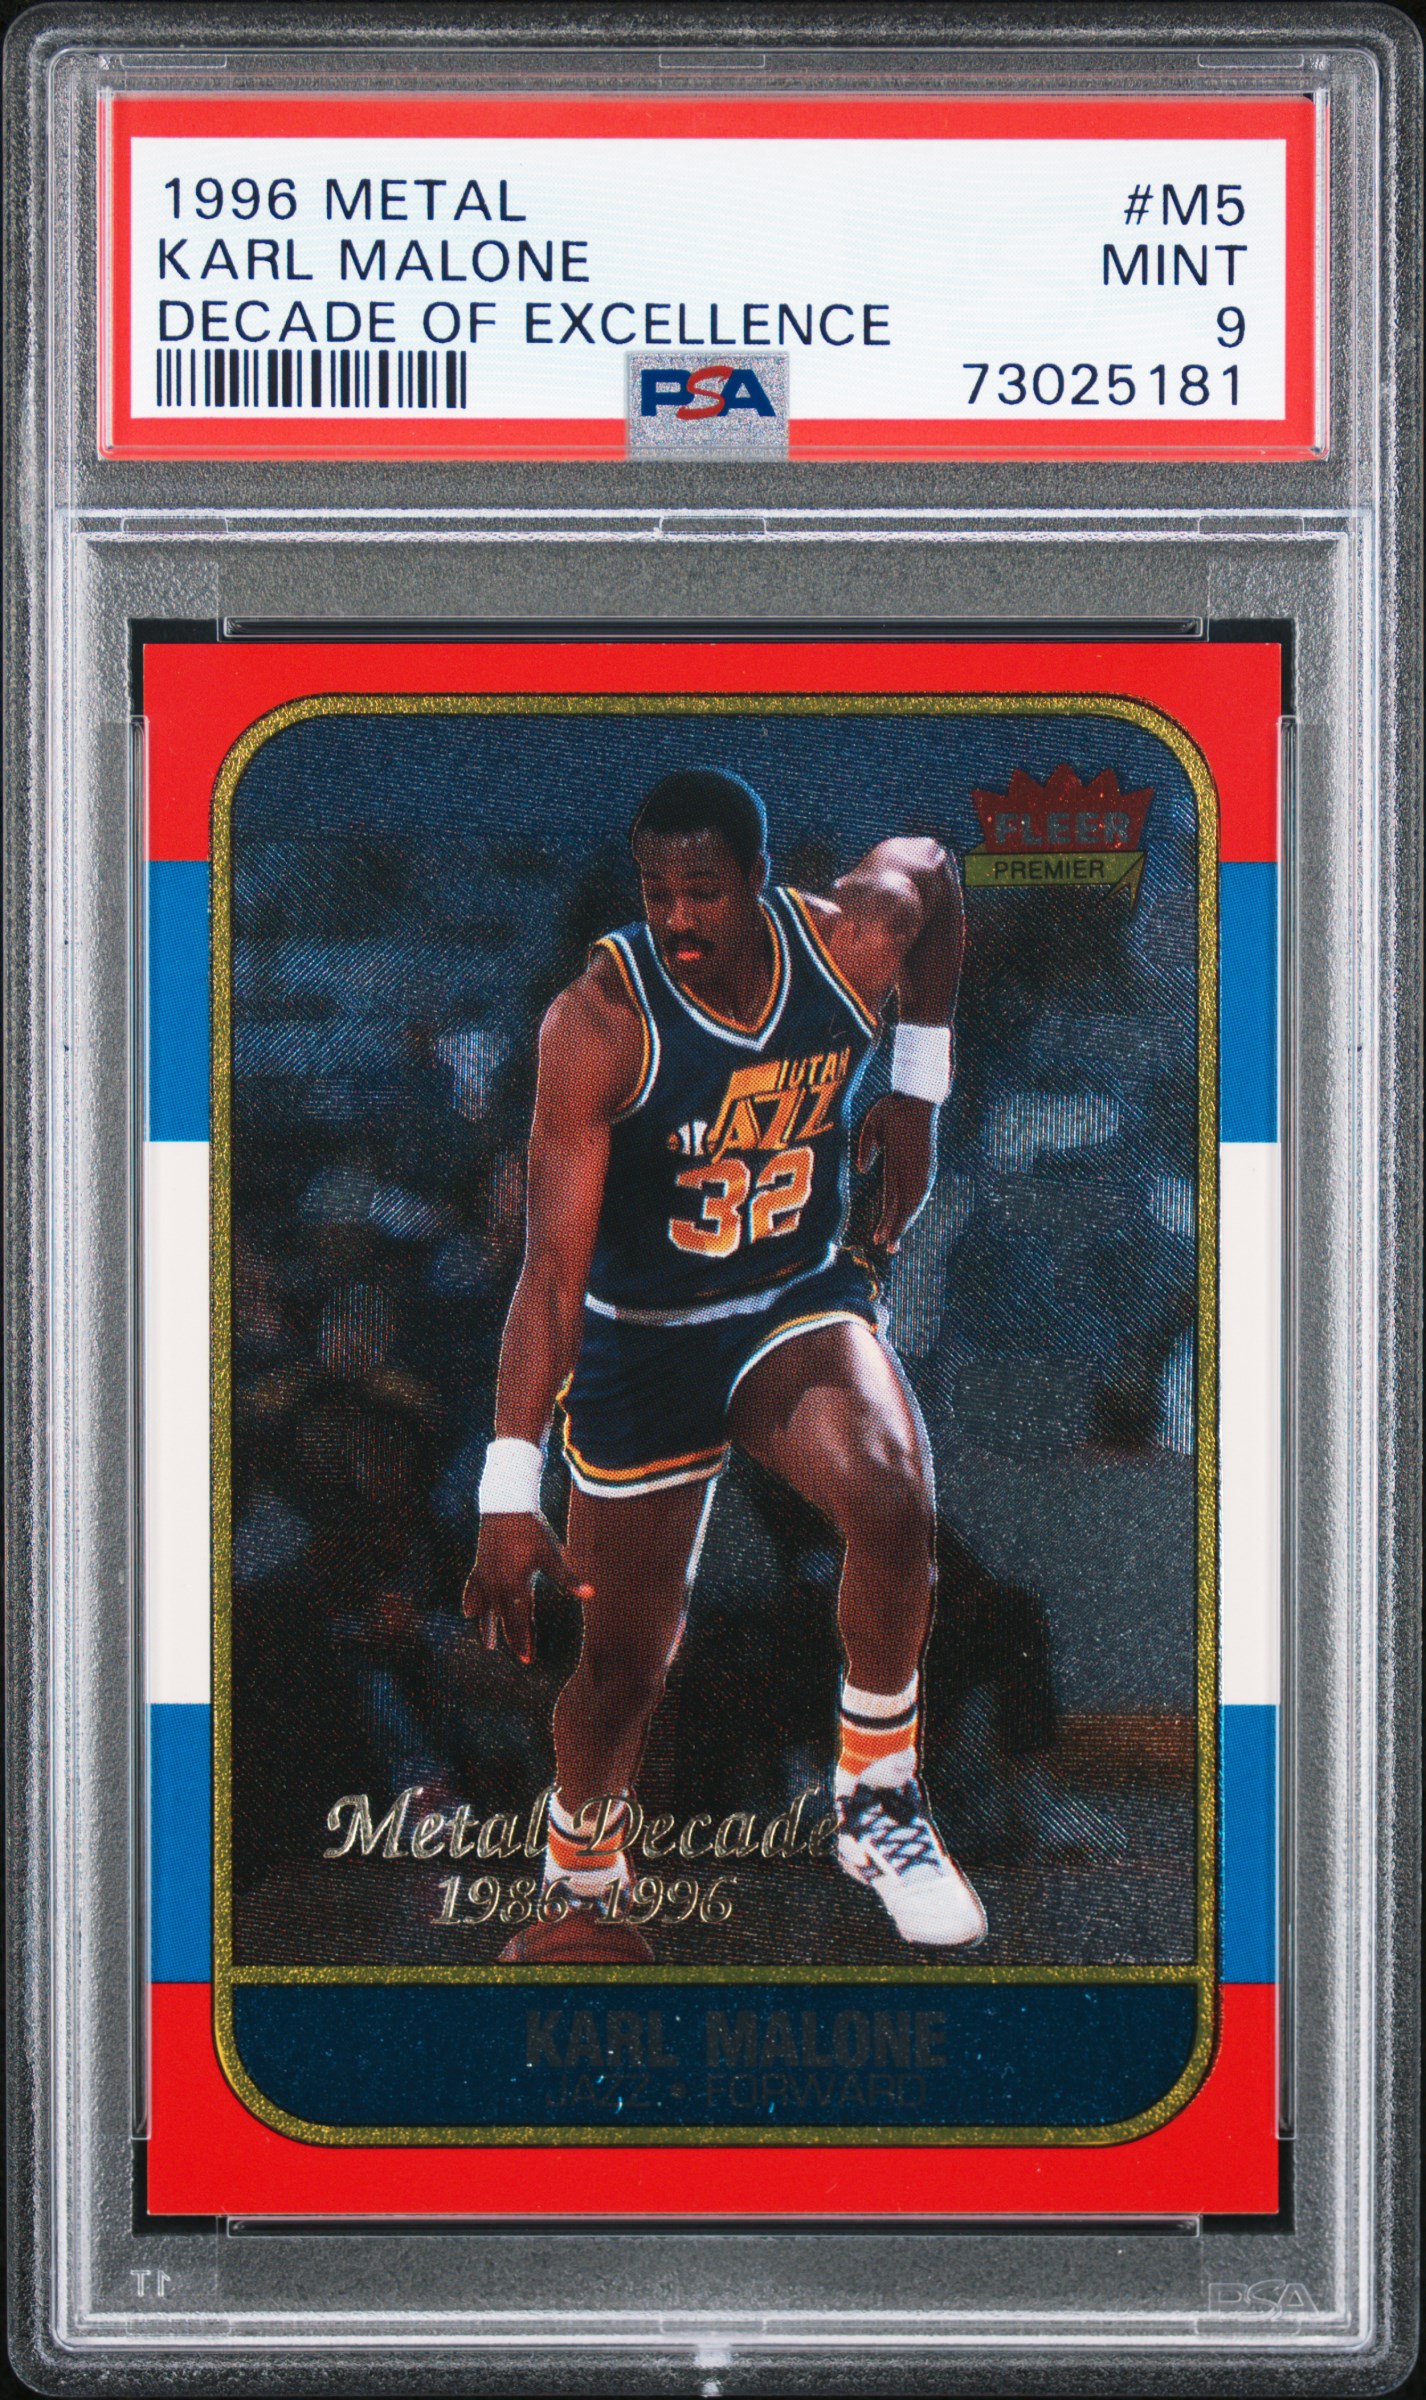 1996-97 Fleer Metal Decade Of Excellence #M5 Karl Malone – PSA MINT 9